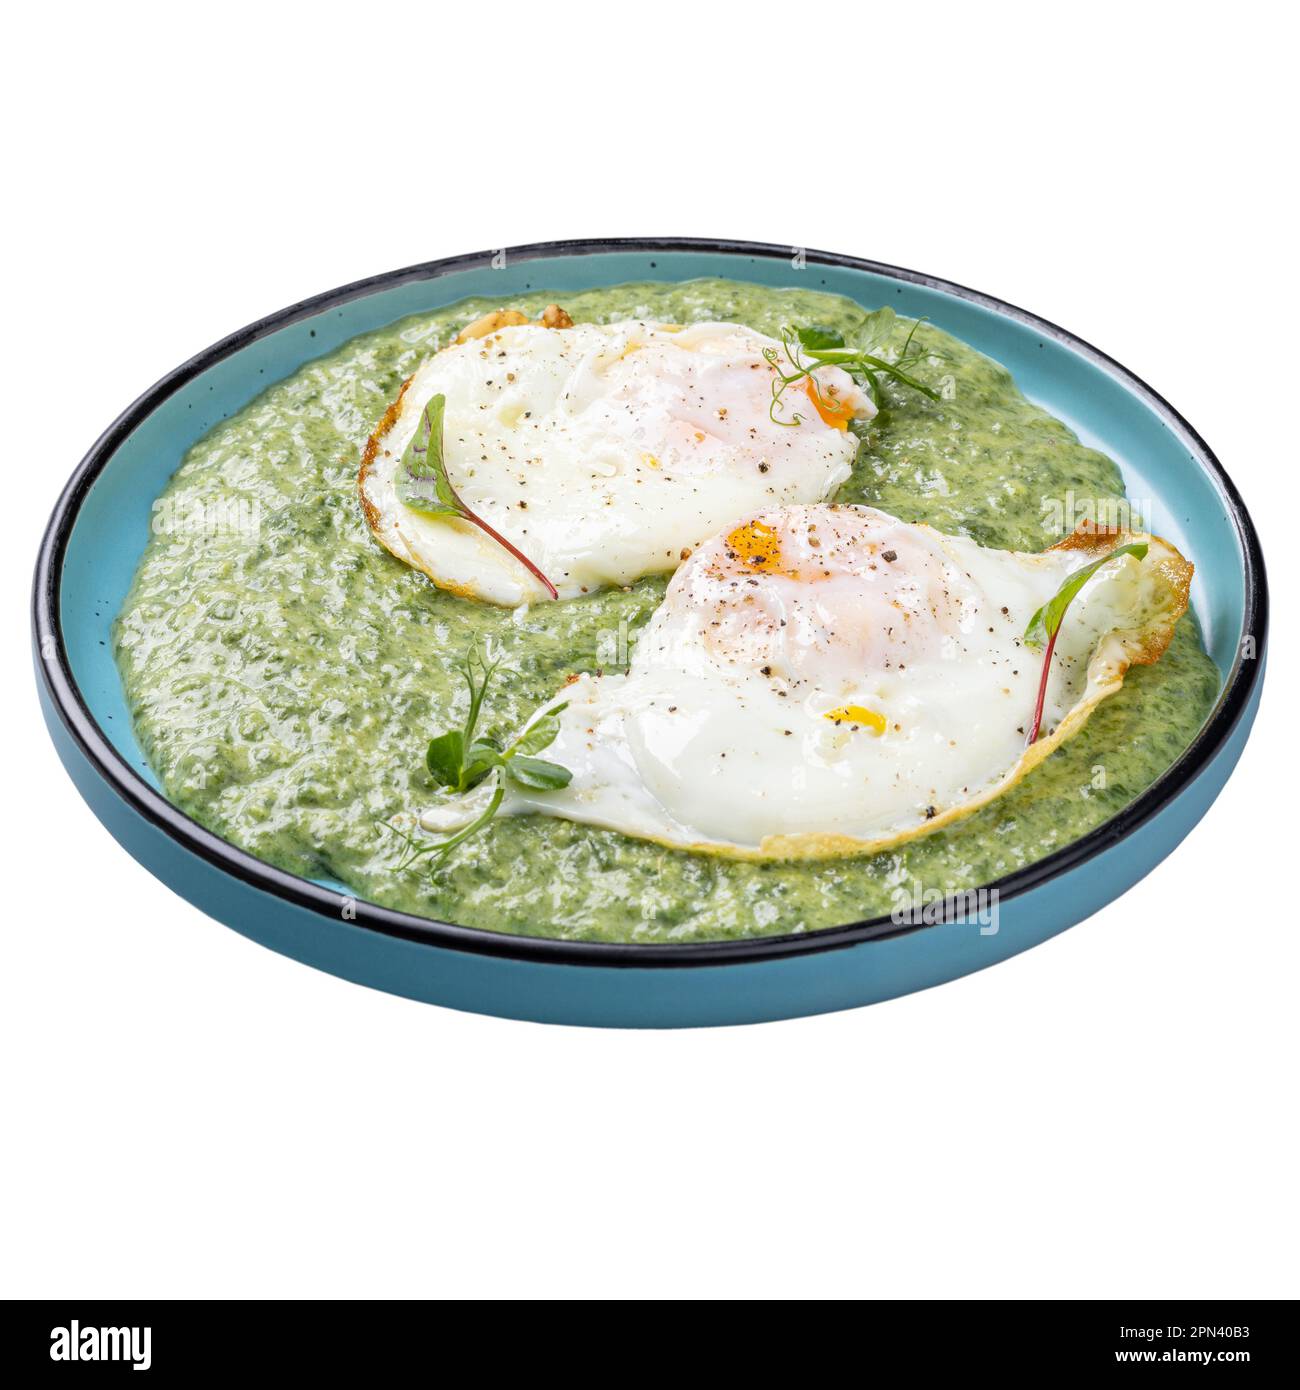 Spinach pottage vegetable dish with fried eggs, restaurant menu concept Stock Photo